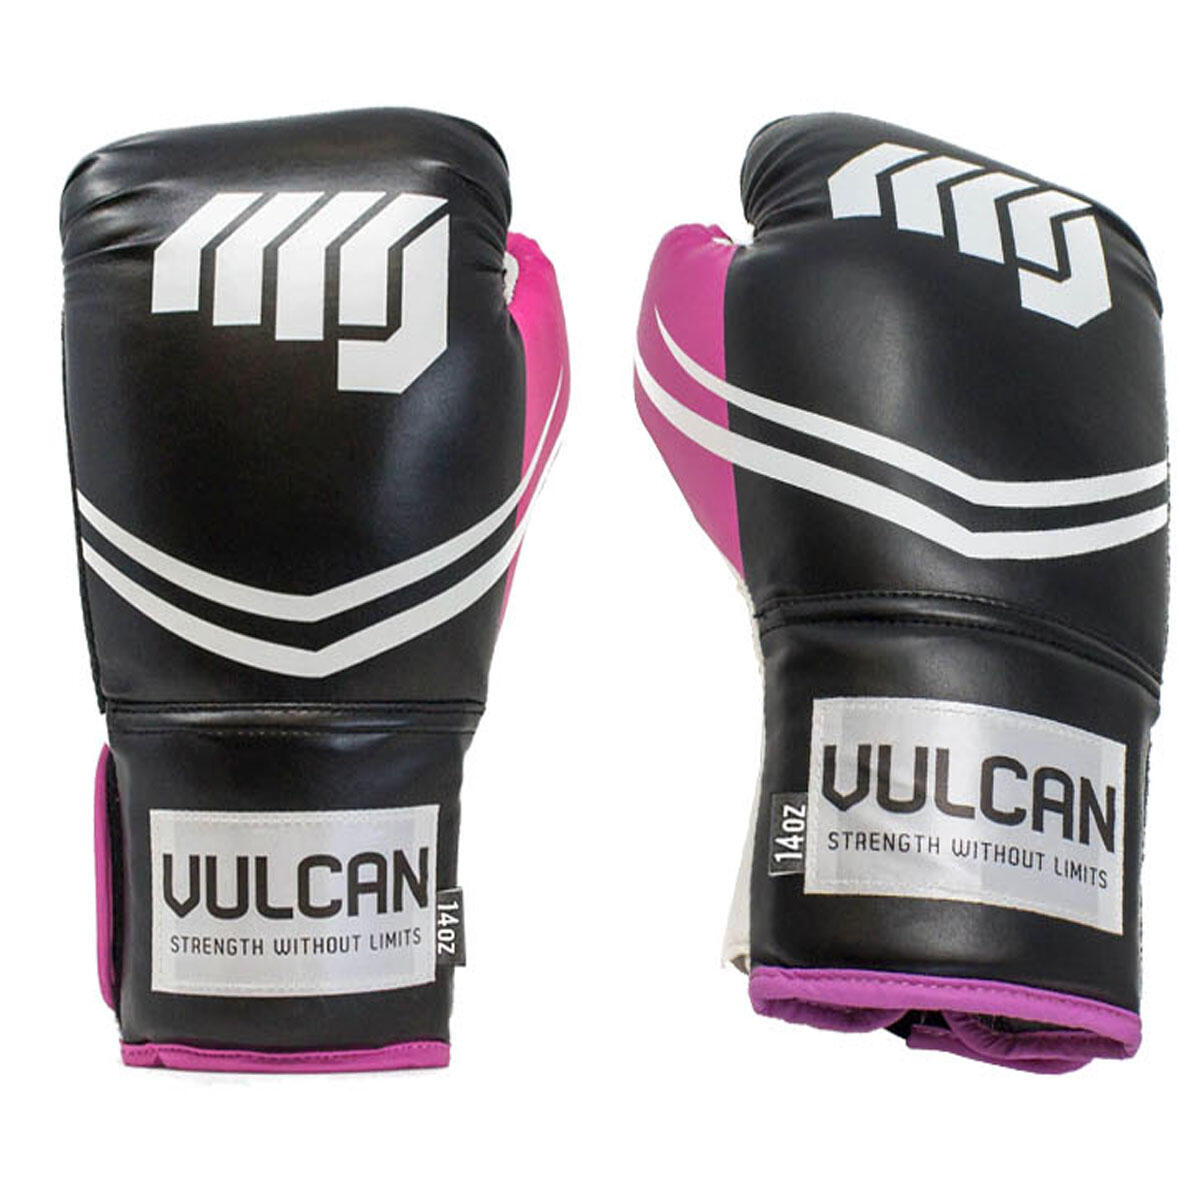 VULCAN BOXING GLOVES 16oz PINK/BLACK WITH HANDWRAPS 4/7